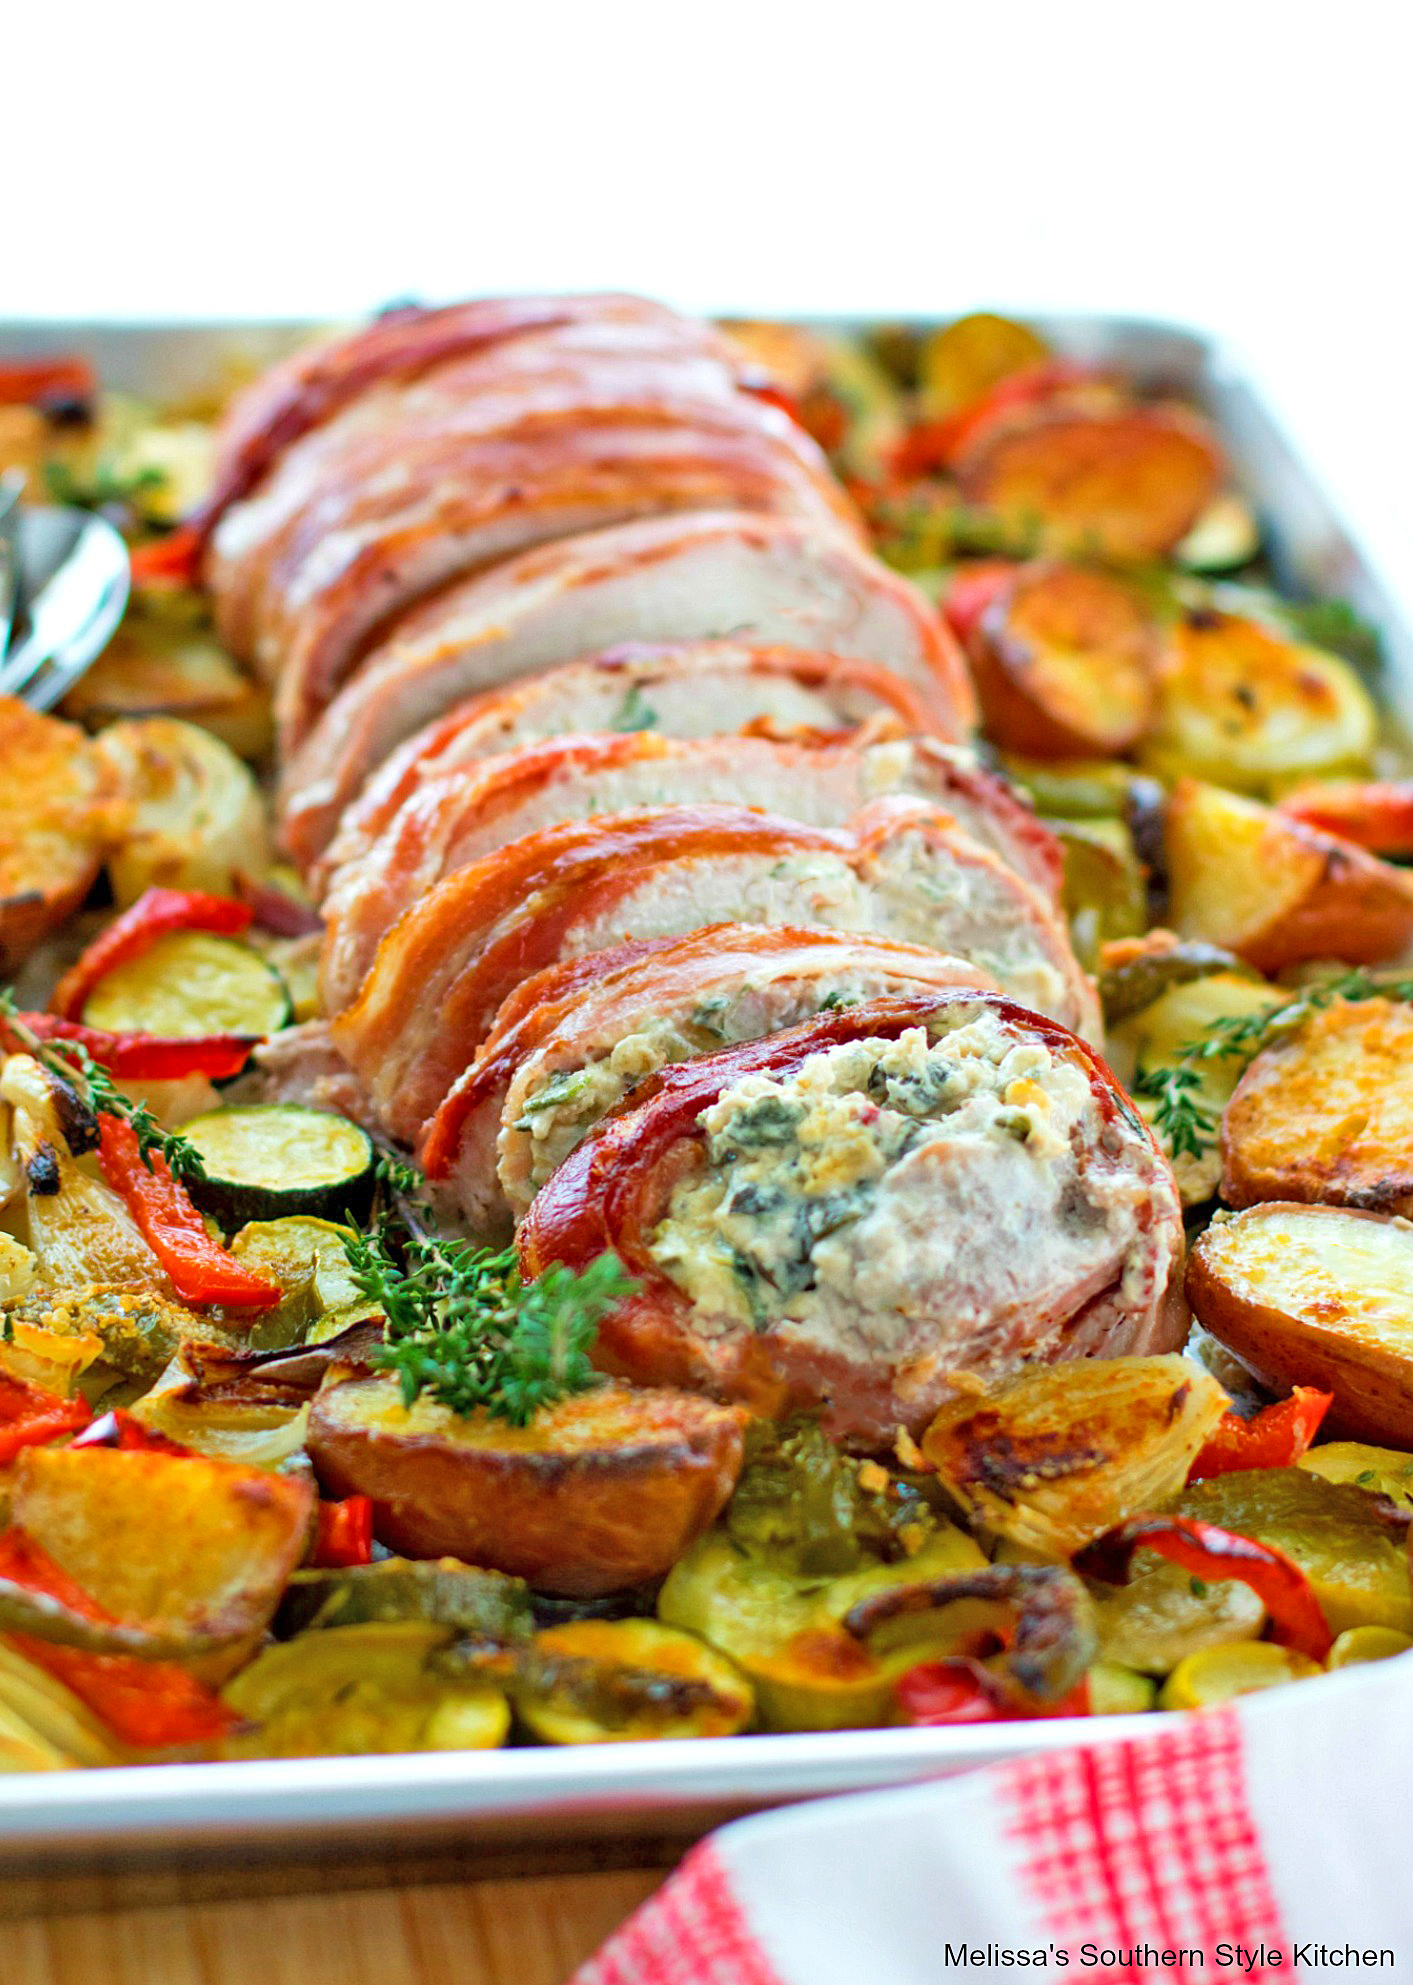 Bacon Wrapped Pork Loin with vegetables